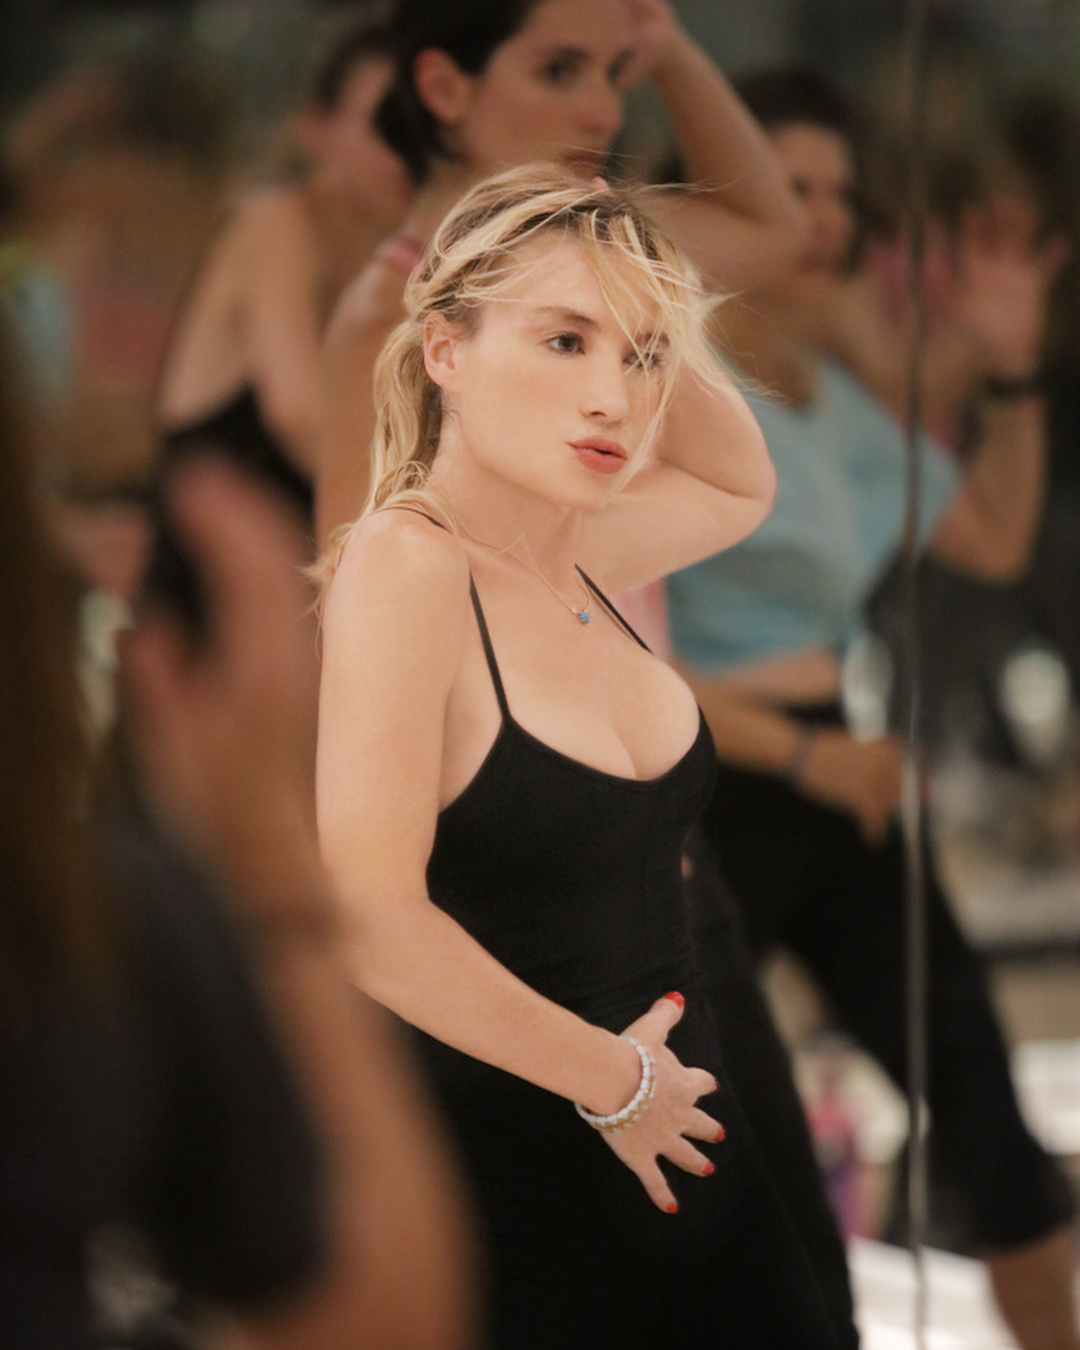 5 Gems Of Wisdom From Fitness Goddess & Celeb Trainer Tracy Anderson